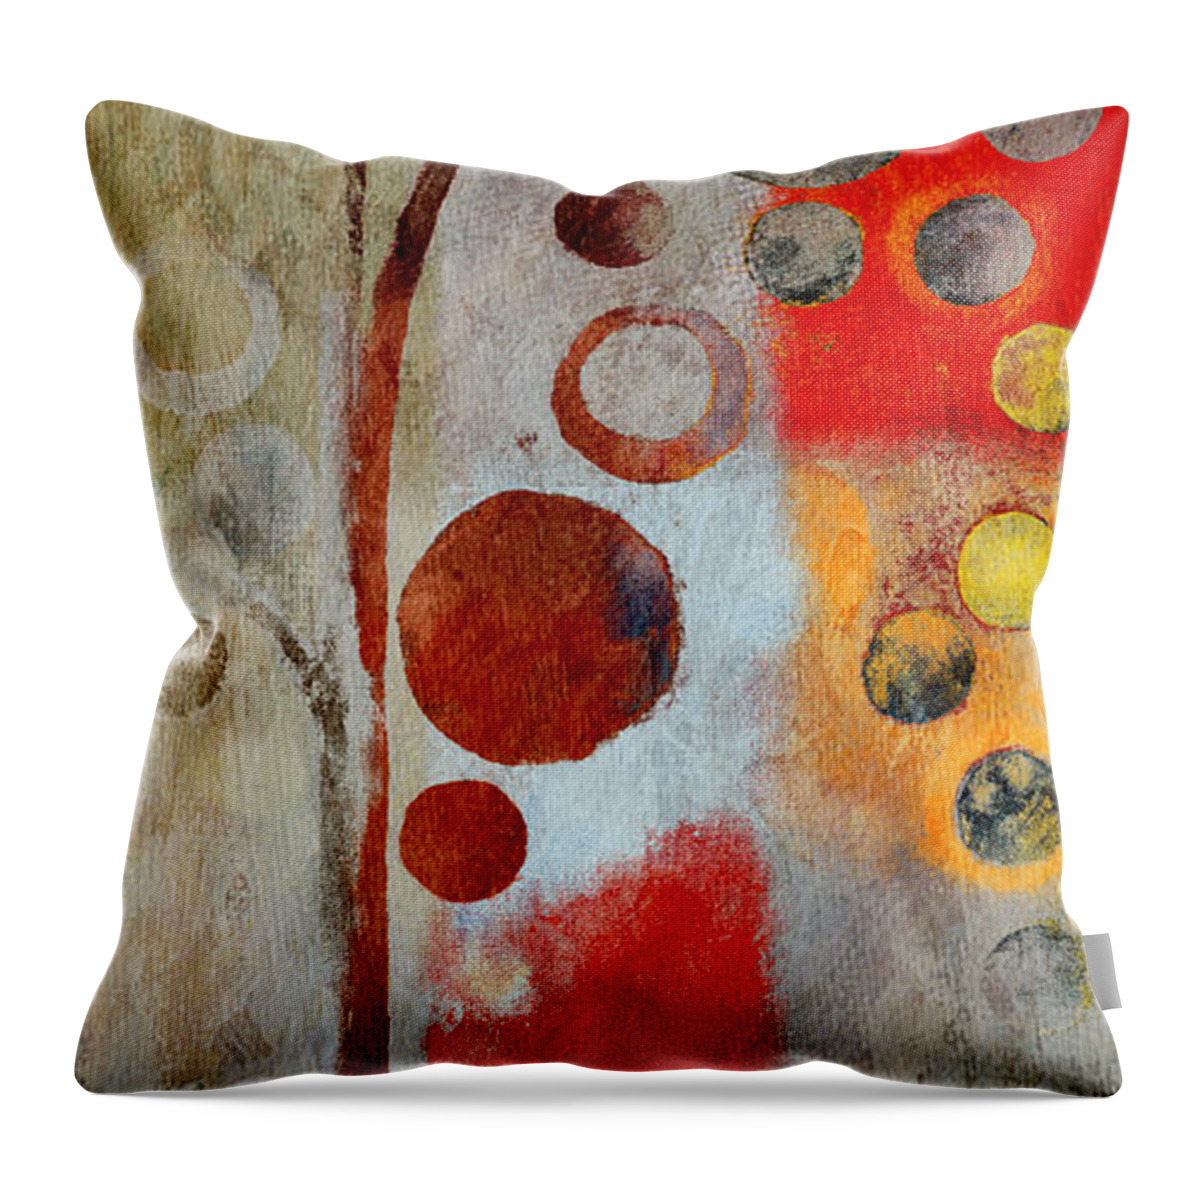 Ubble Tree Tree Throw Pillow featuring the painting Bubble Tree - Ls55 by Variance Collections